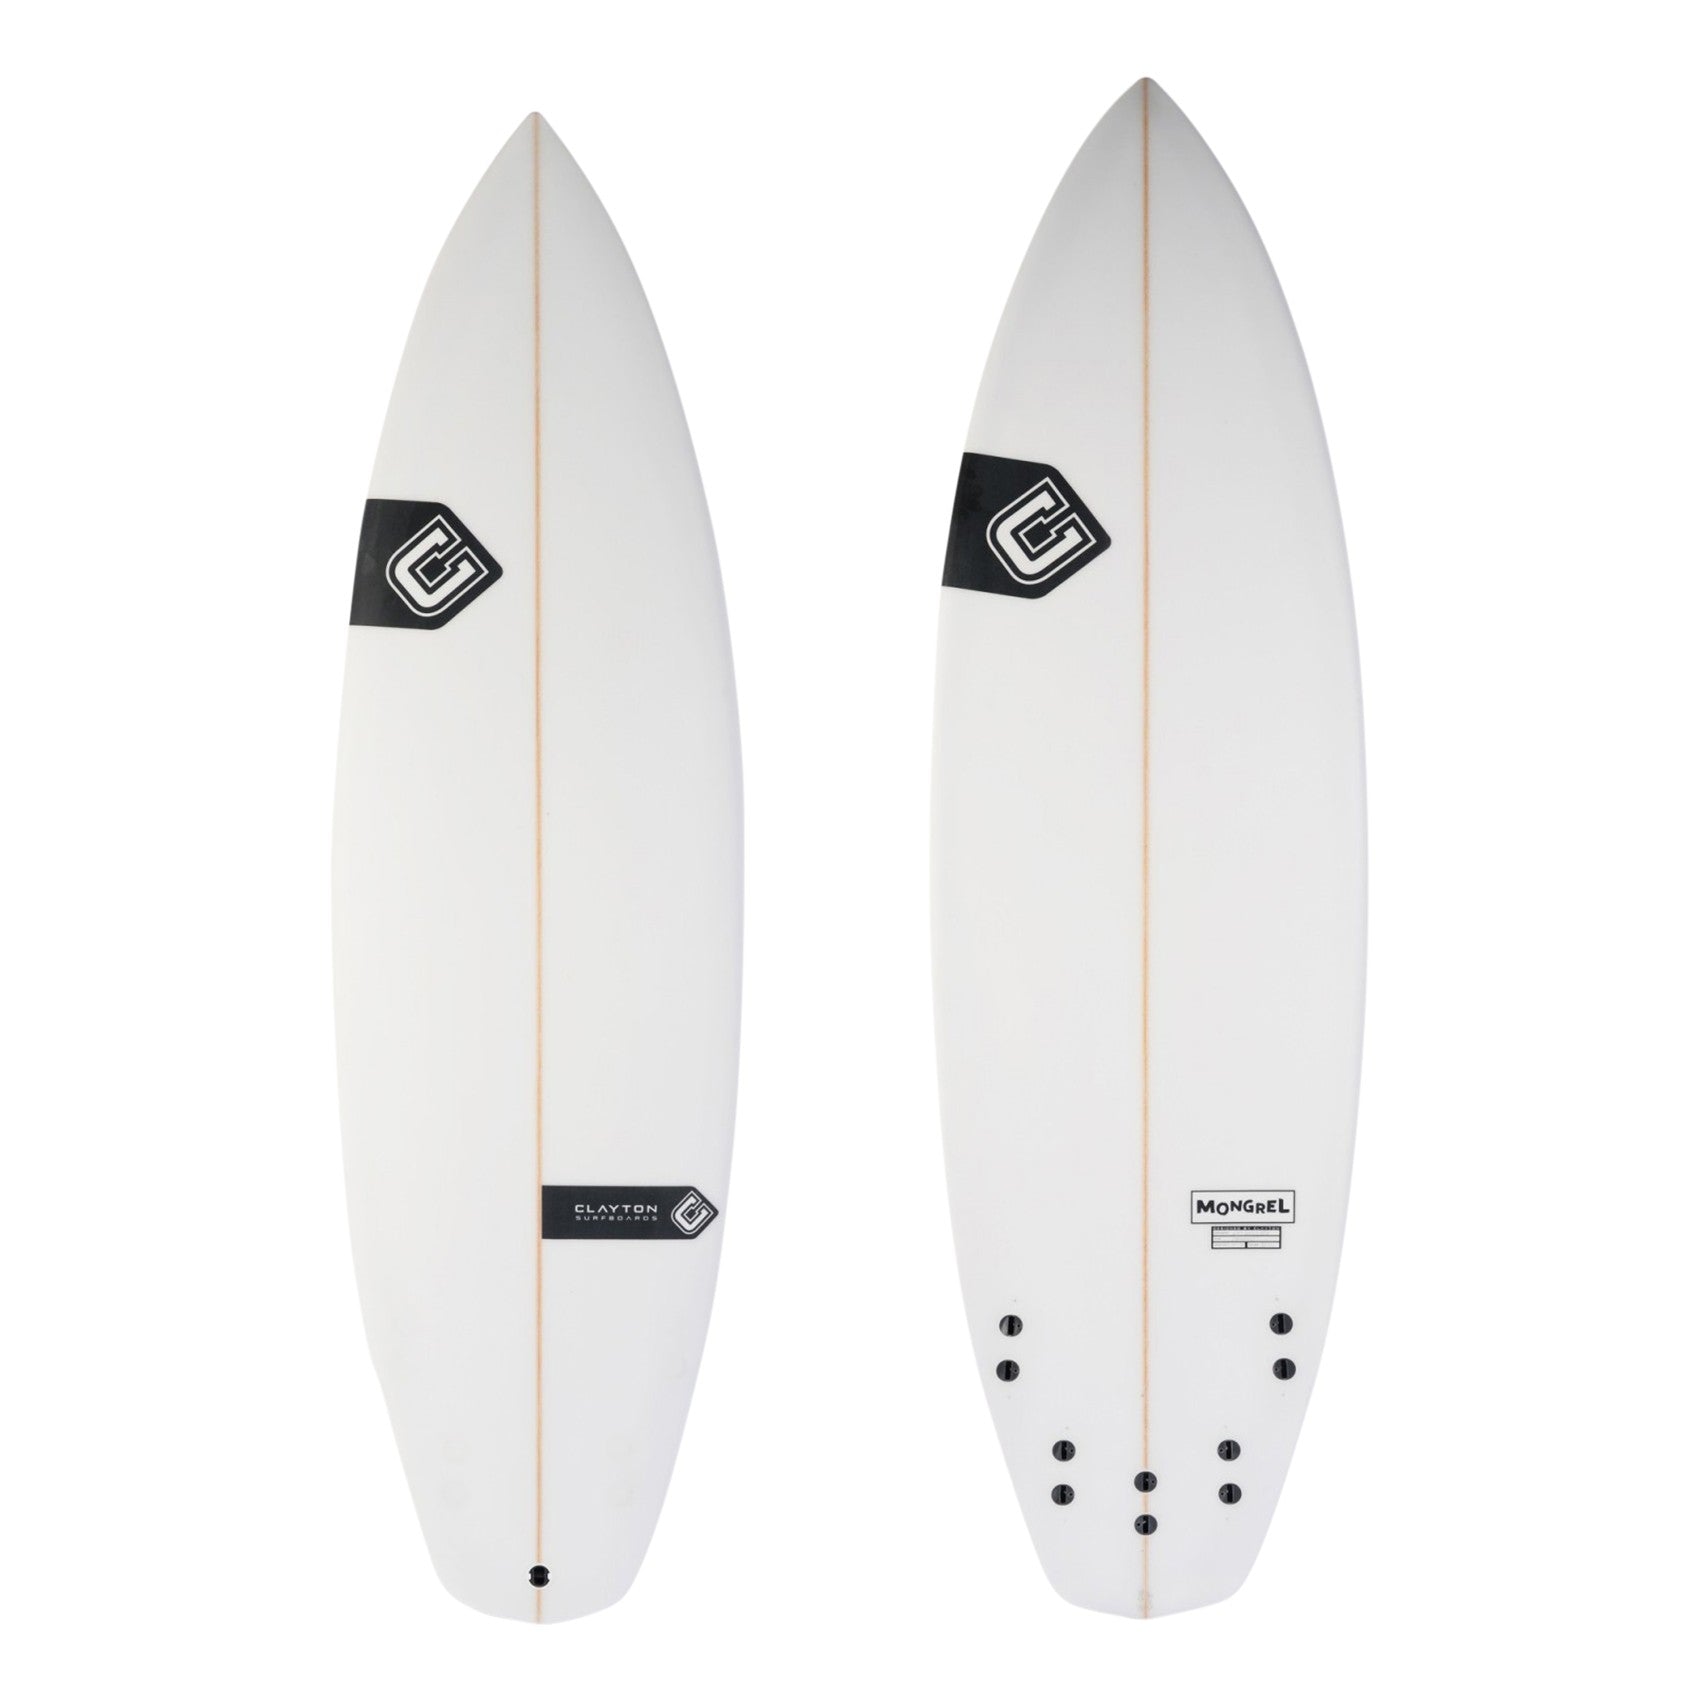 CLAYTON Surfboards - Mongrel (5 ends) (PU)